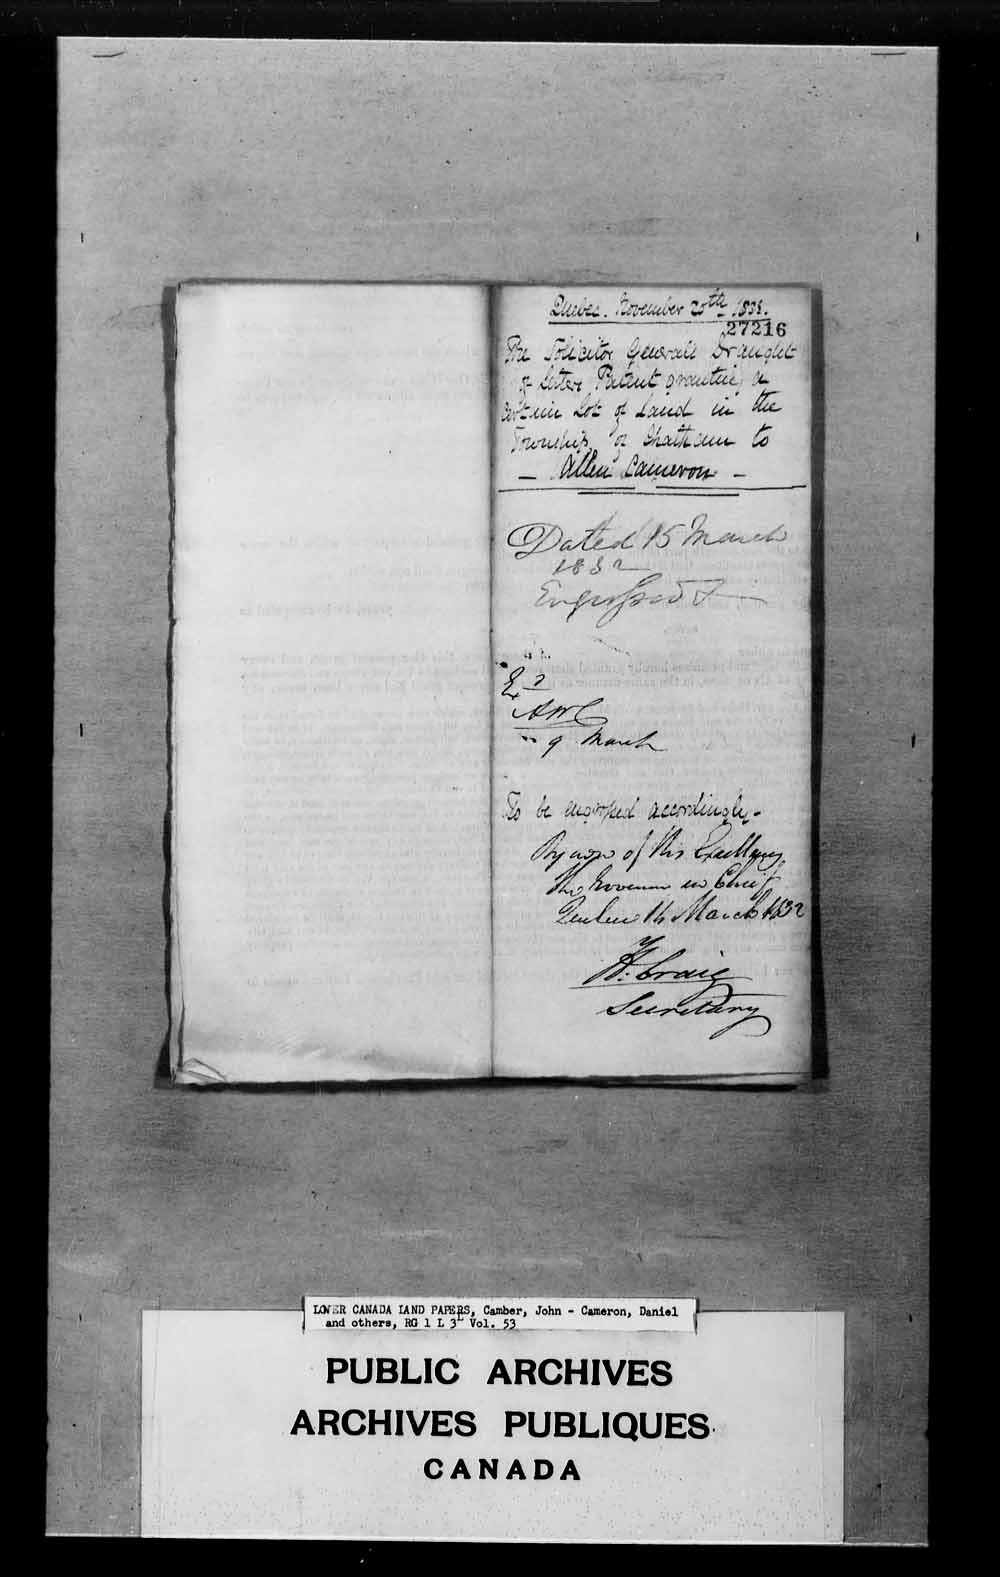 Digitized page of  for Image No.: e006611593